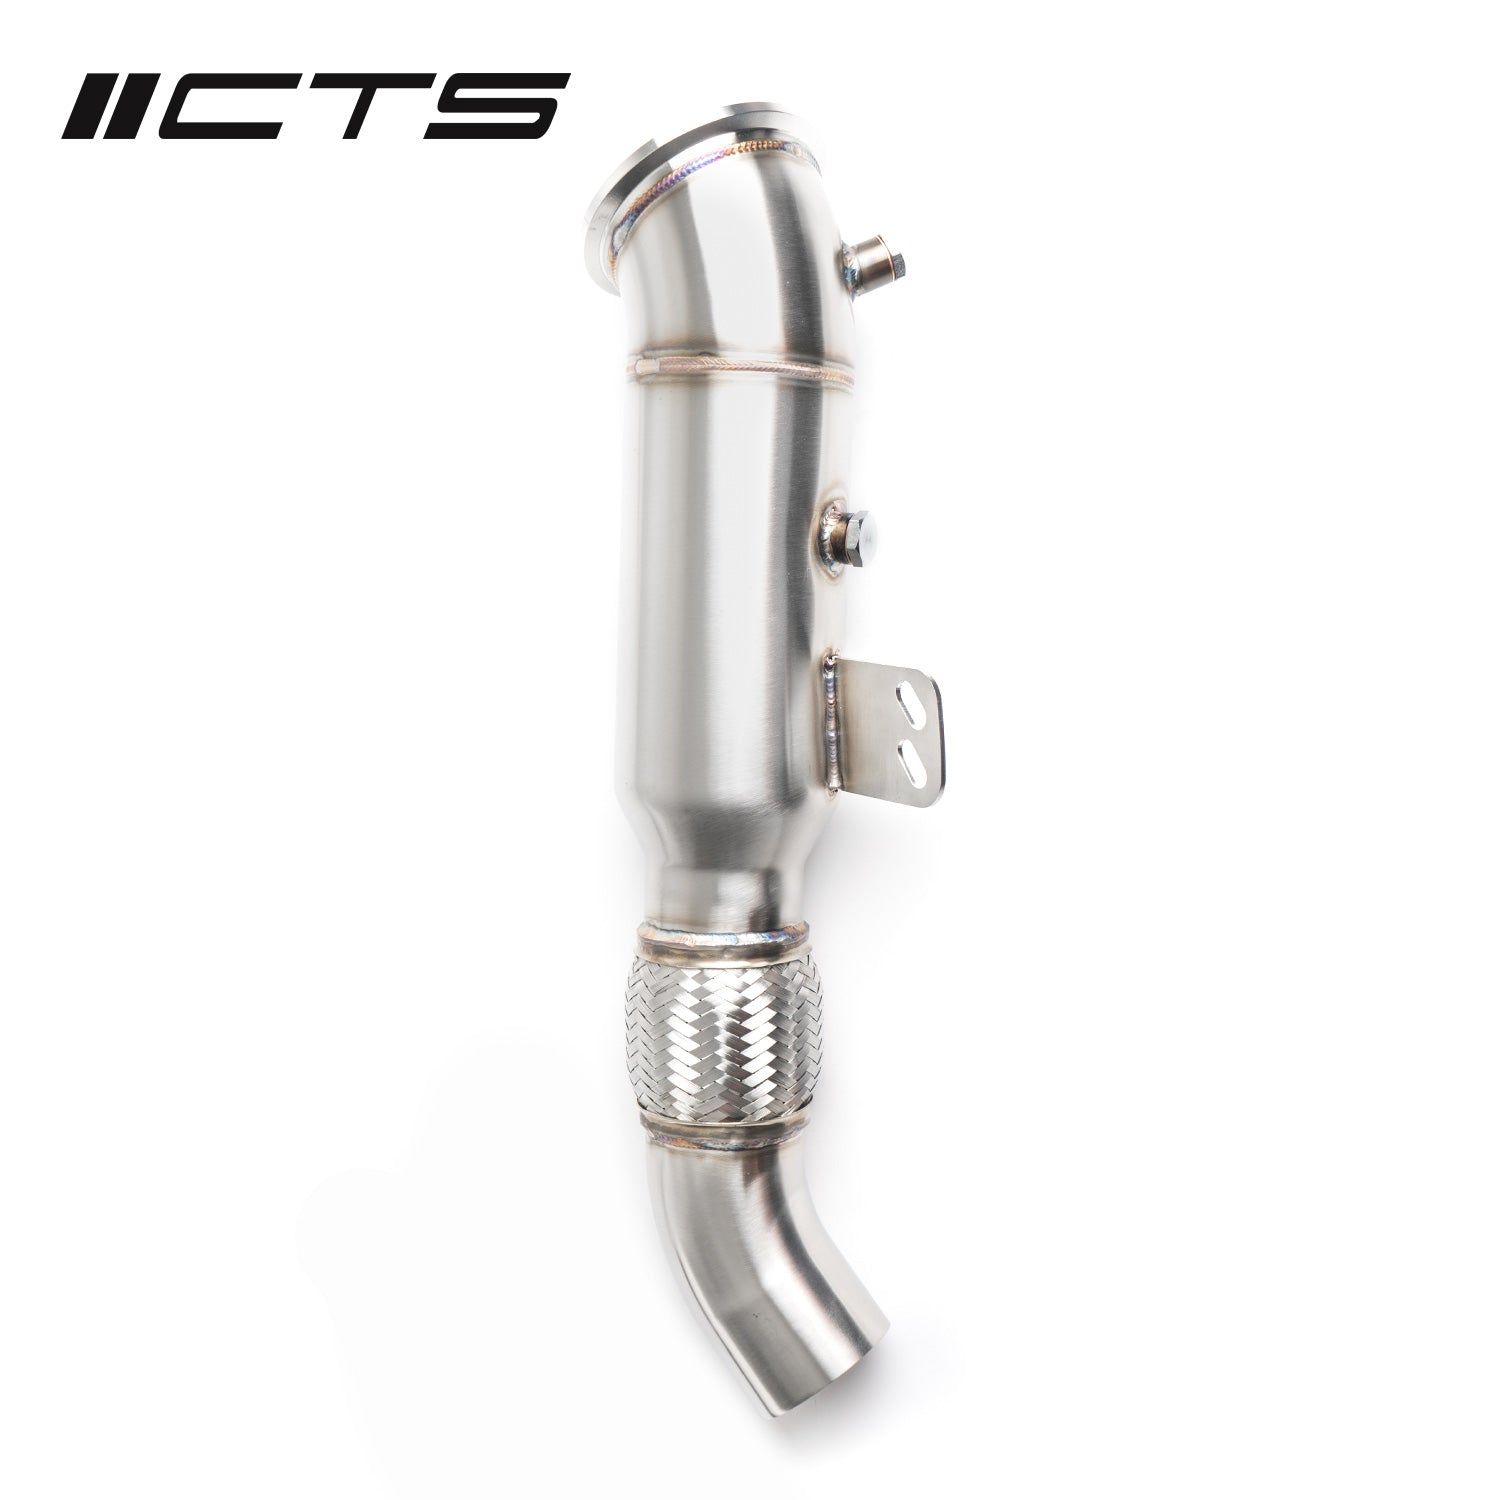 CTS TURBO 4.5″ CATLESS DOWNPIPE FOR MK5 A90 2020 TOYOTA SUPRA